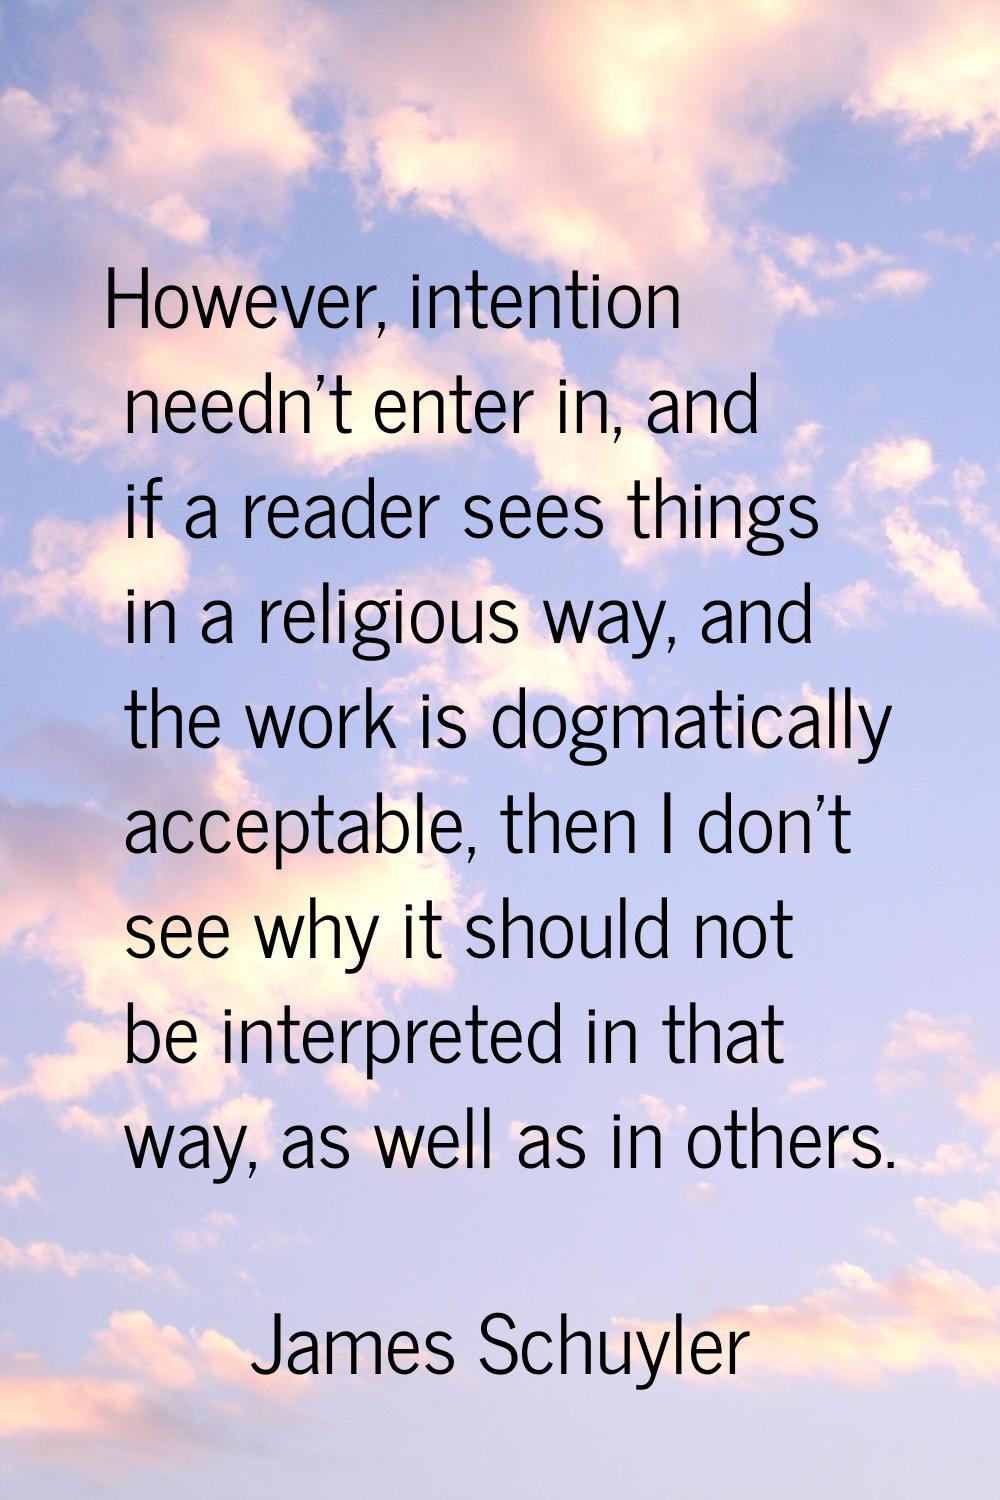 However, intention needn't enter in, and if a reader sees things in a religious way, and the work i